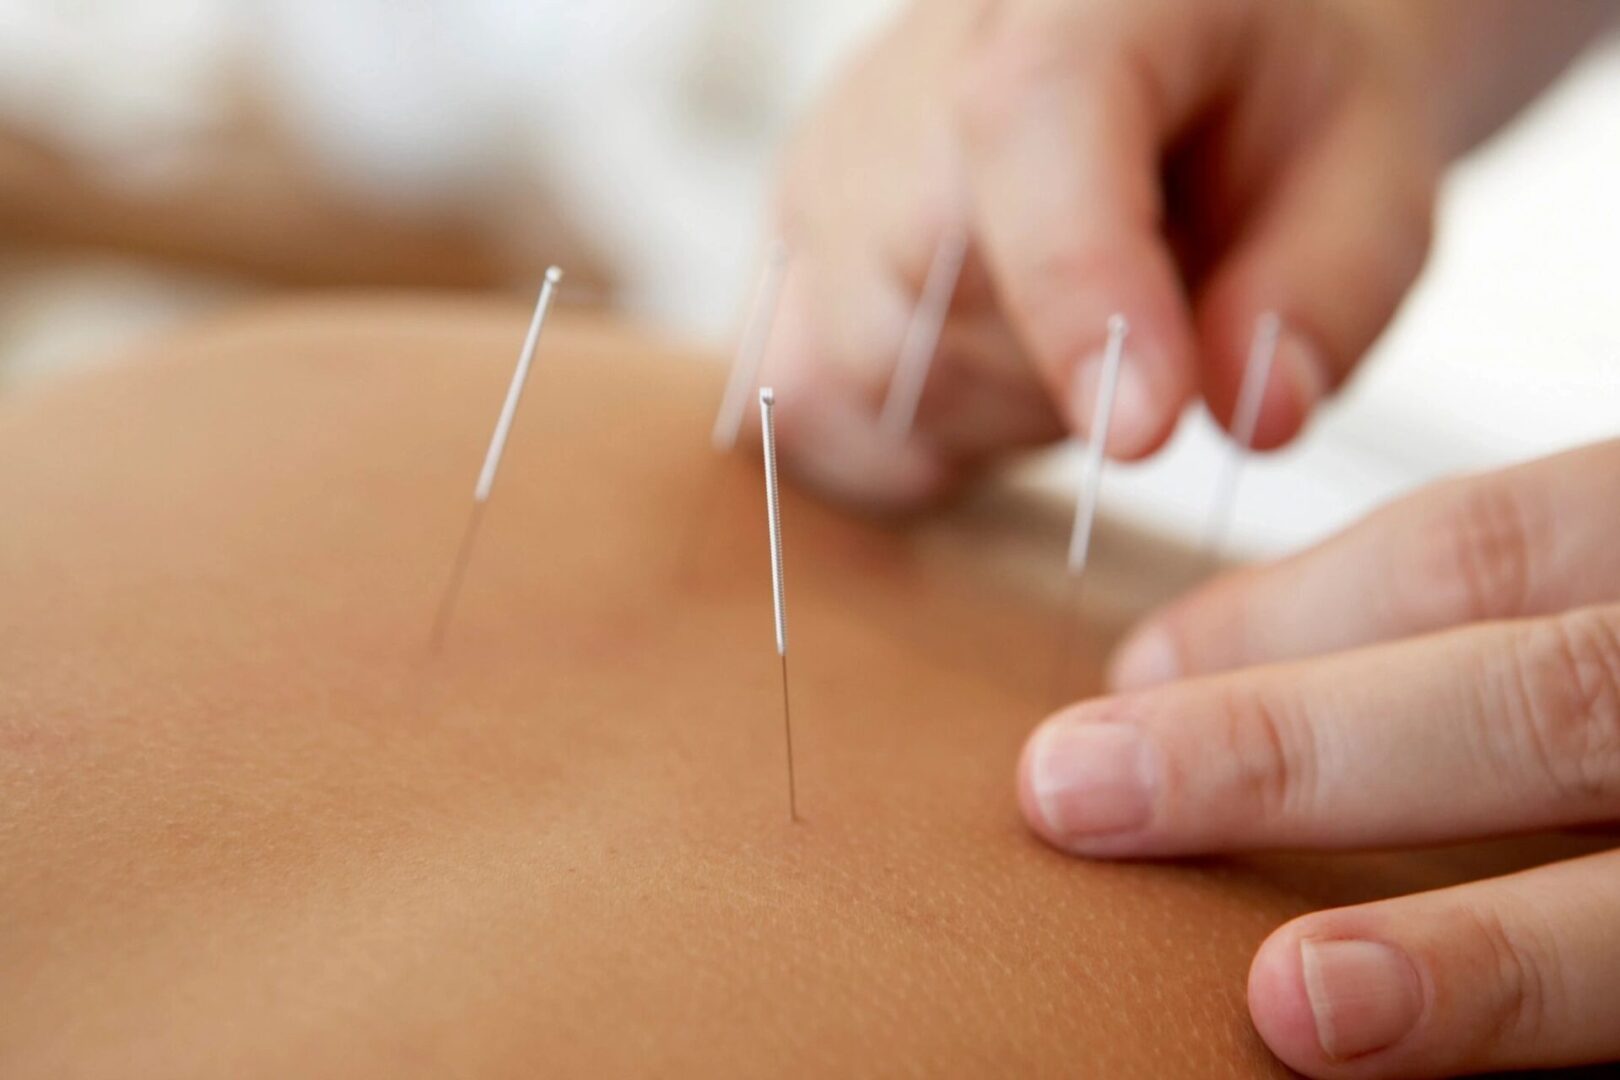 A person is using acupuncture needles to treat a patient.